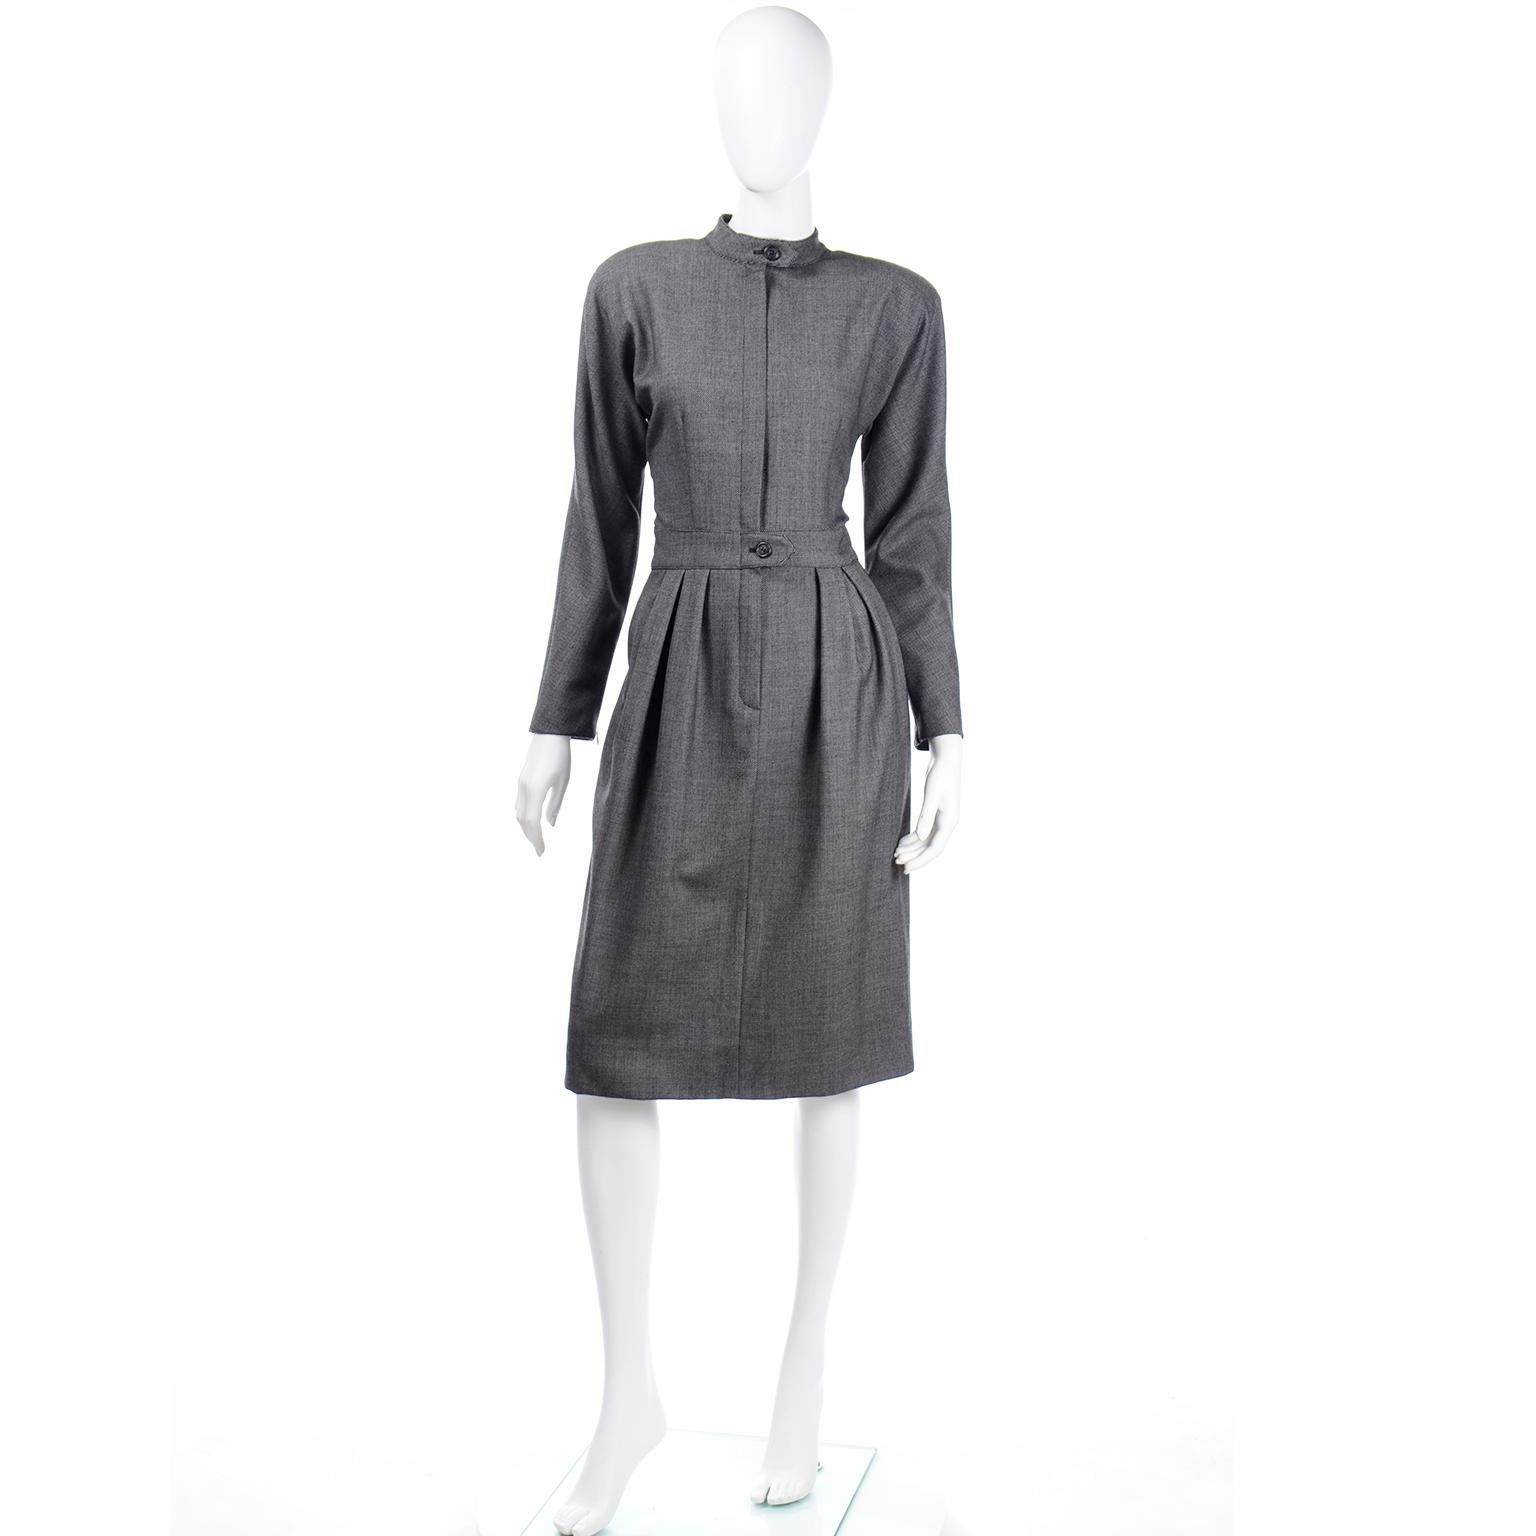 We love vintage Geoffrey Beene pieces and this dress is a classic piece that has the quality you would expect from Mr. Beene. The dress is in a woven micro check wool and has a single button at the mandarin style collar and a front center seam